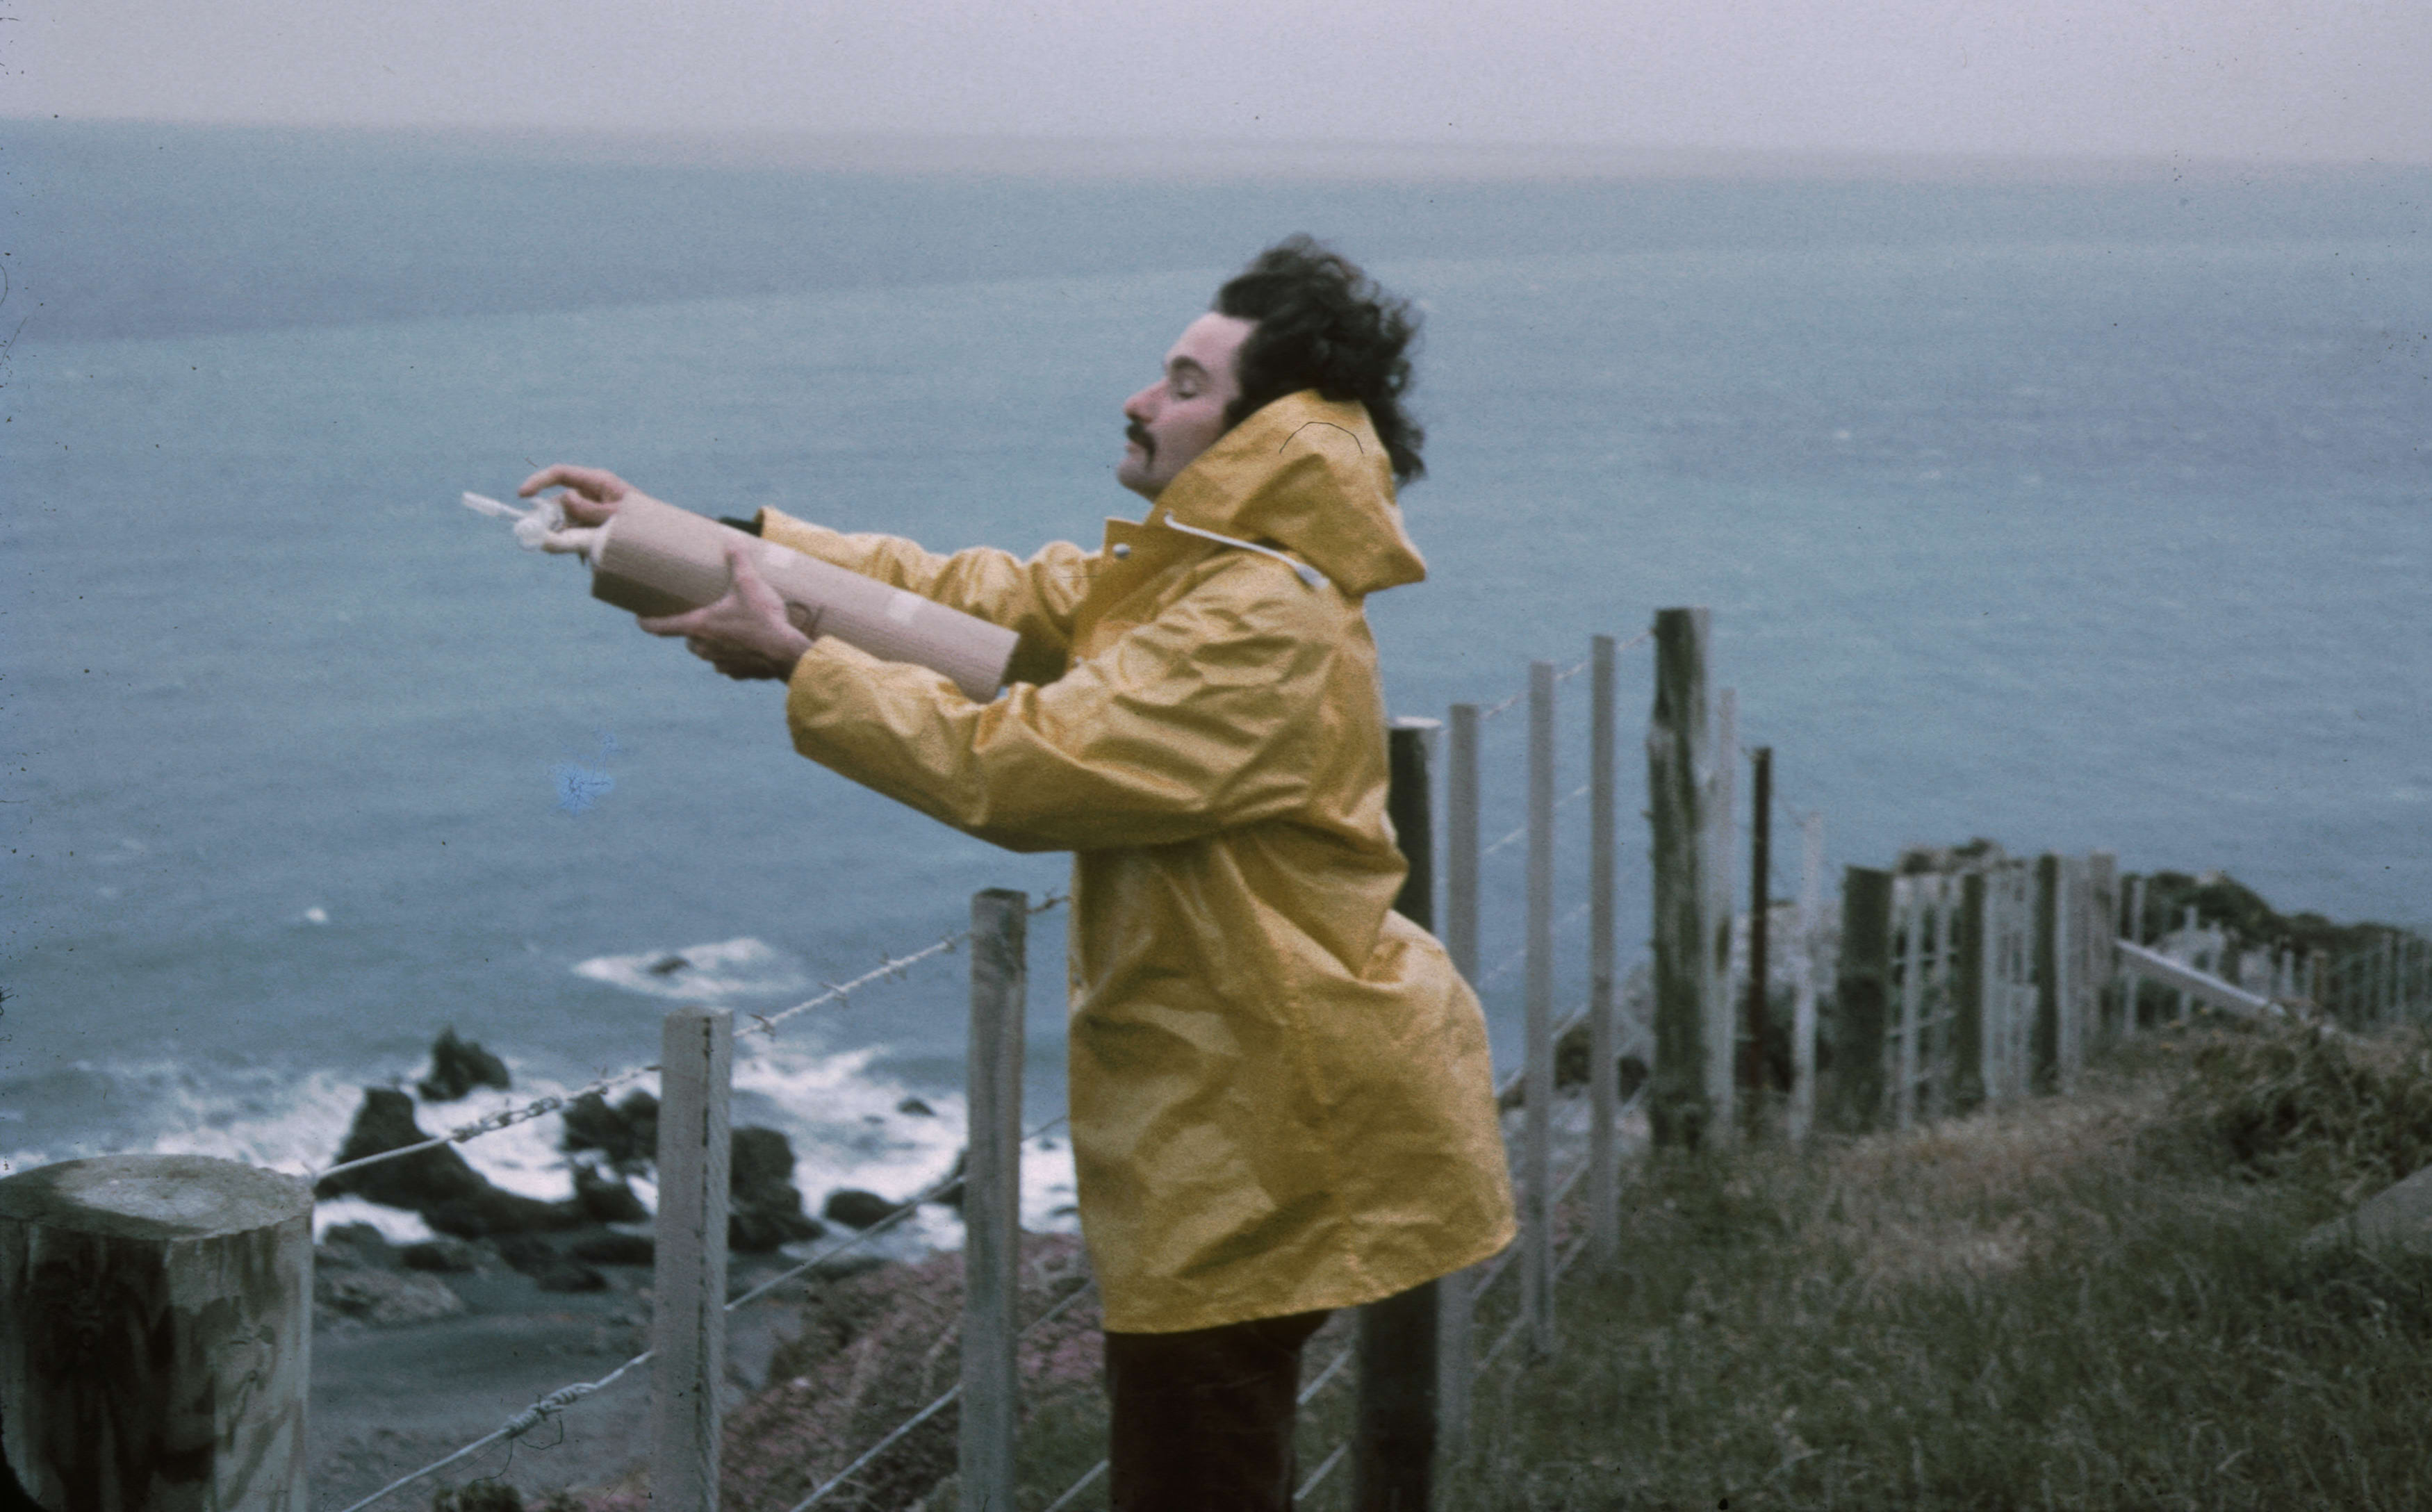 Dave Lowe taking an air flask sample at the edge of the Baring Head cliff in 1972.